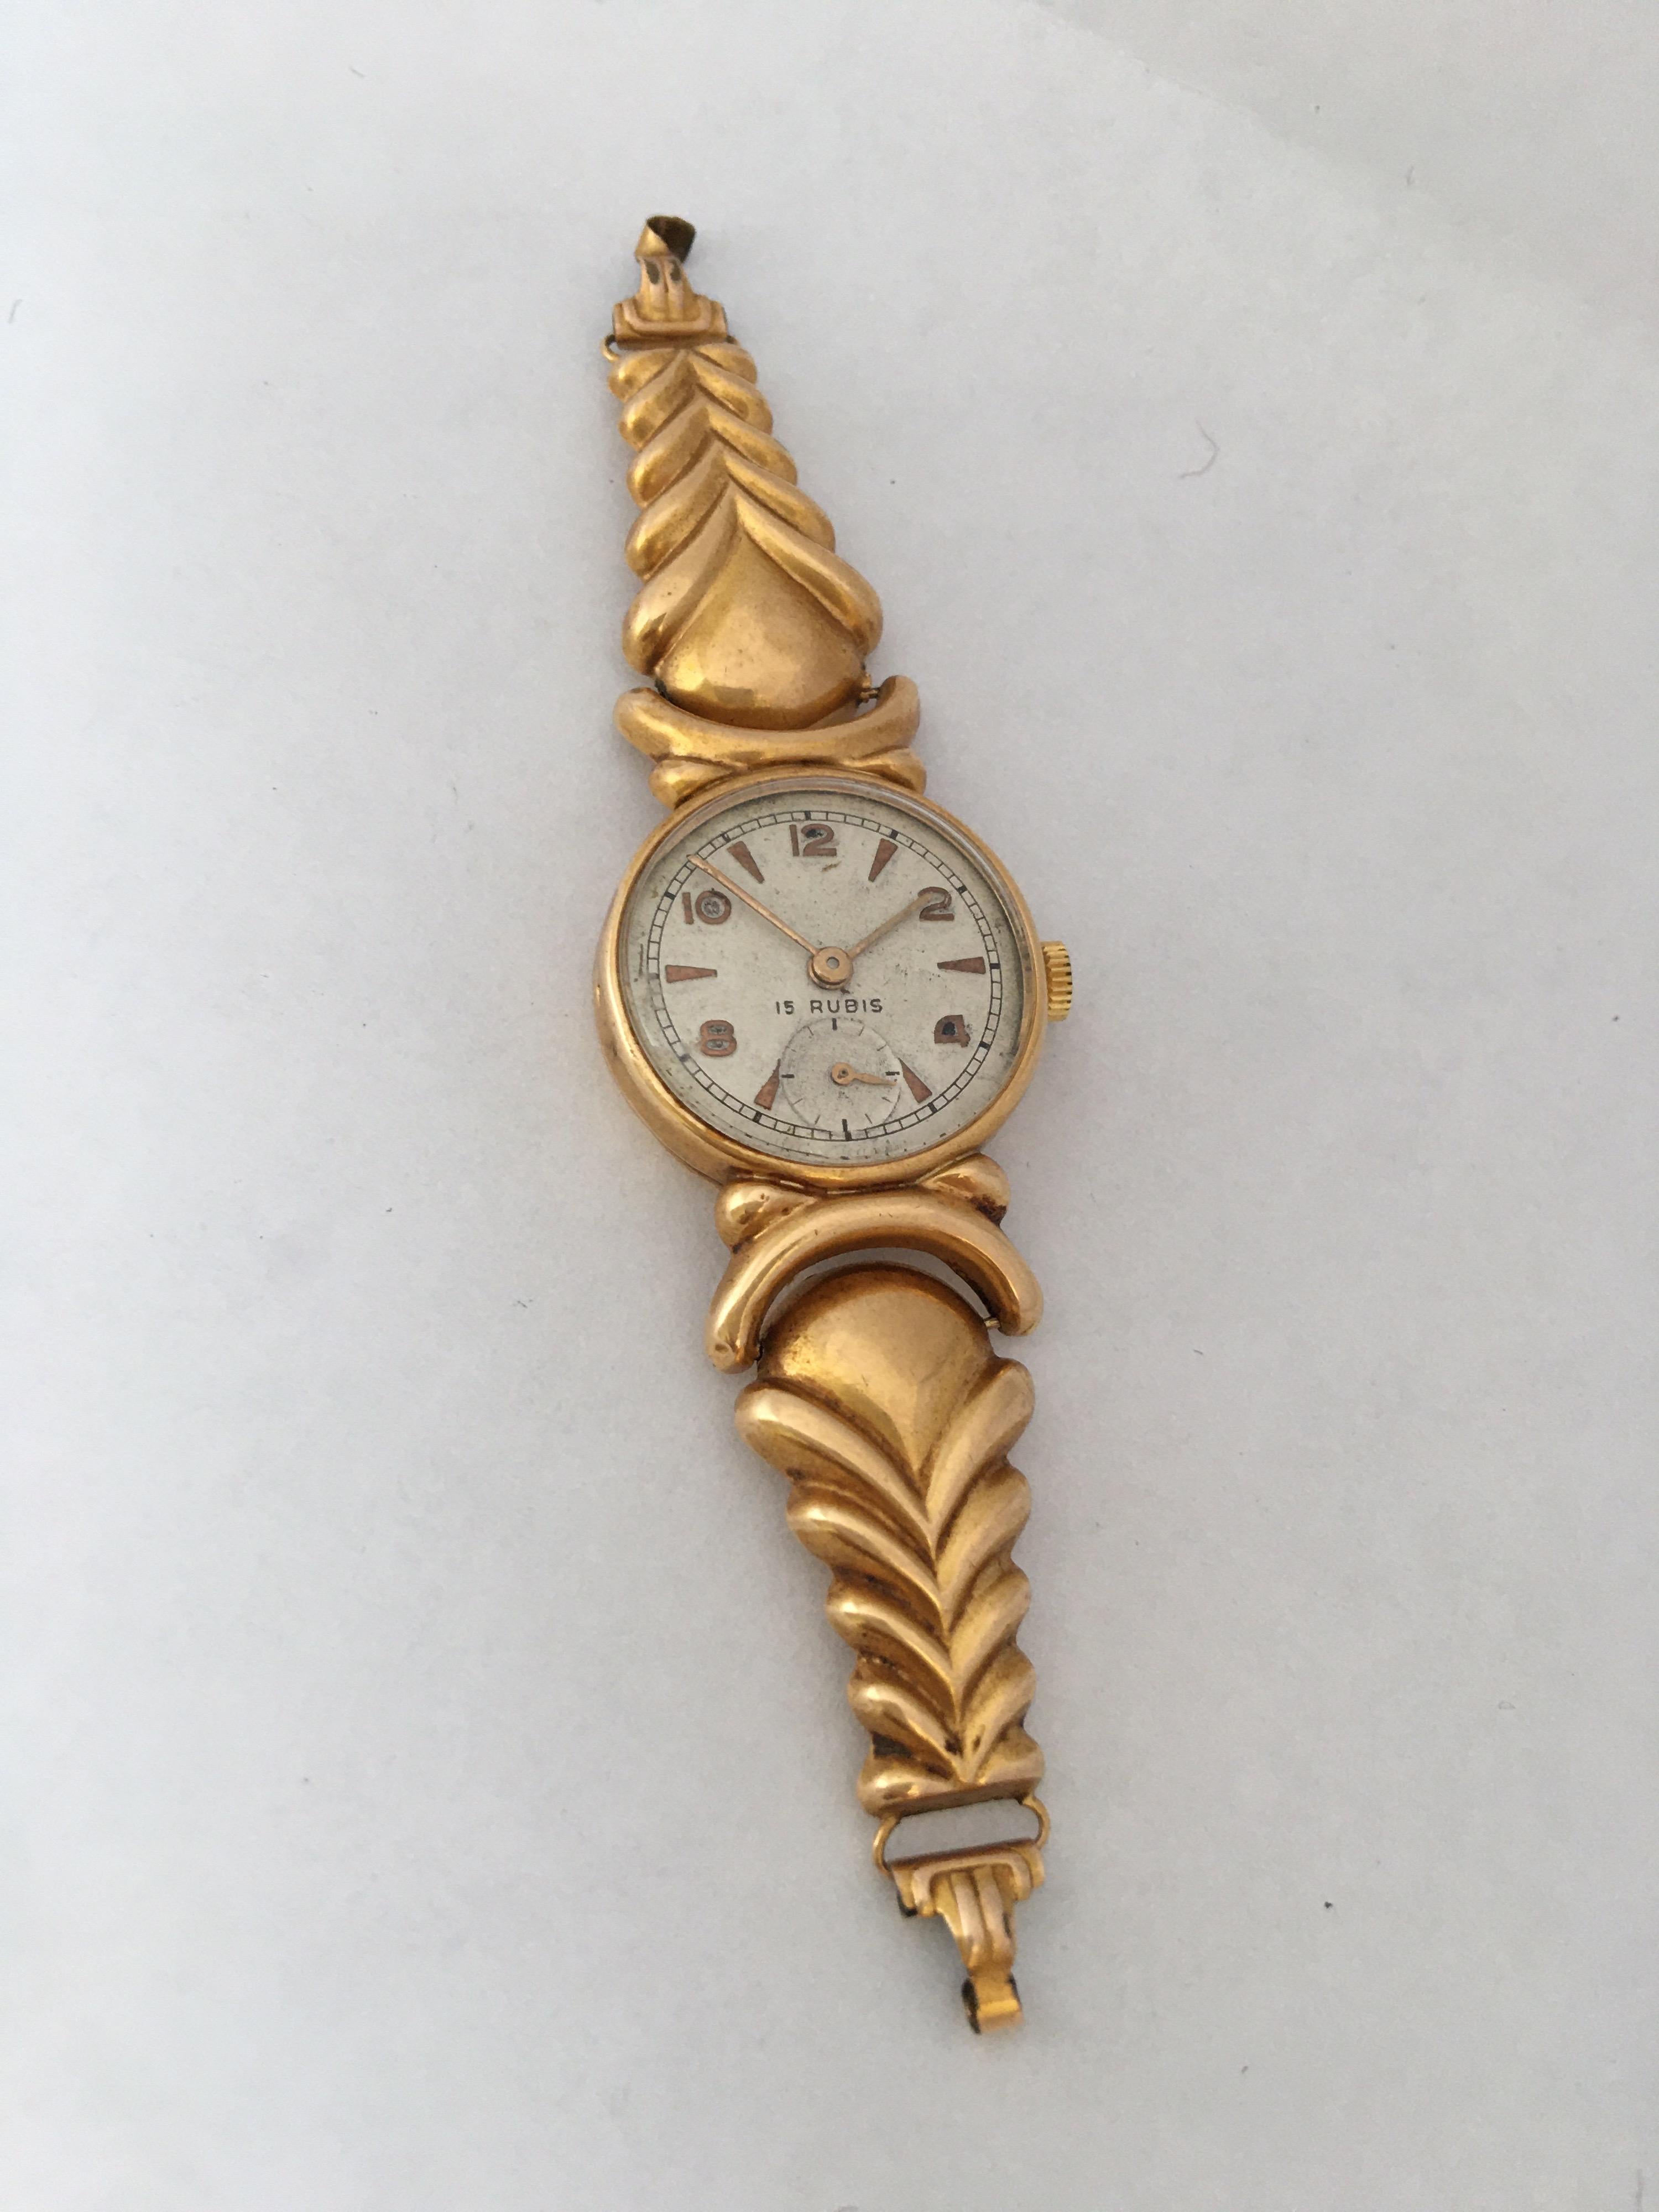 This beautiful vintage gold hand winding watch is working and it is ticking nicely and it runs well. Part of the gold metal strap is missing as shown. The silvered dial is a bit worn. Some Light scratches and dents on the gold watch case as shown.